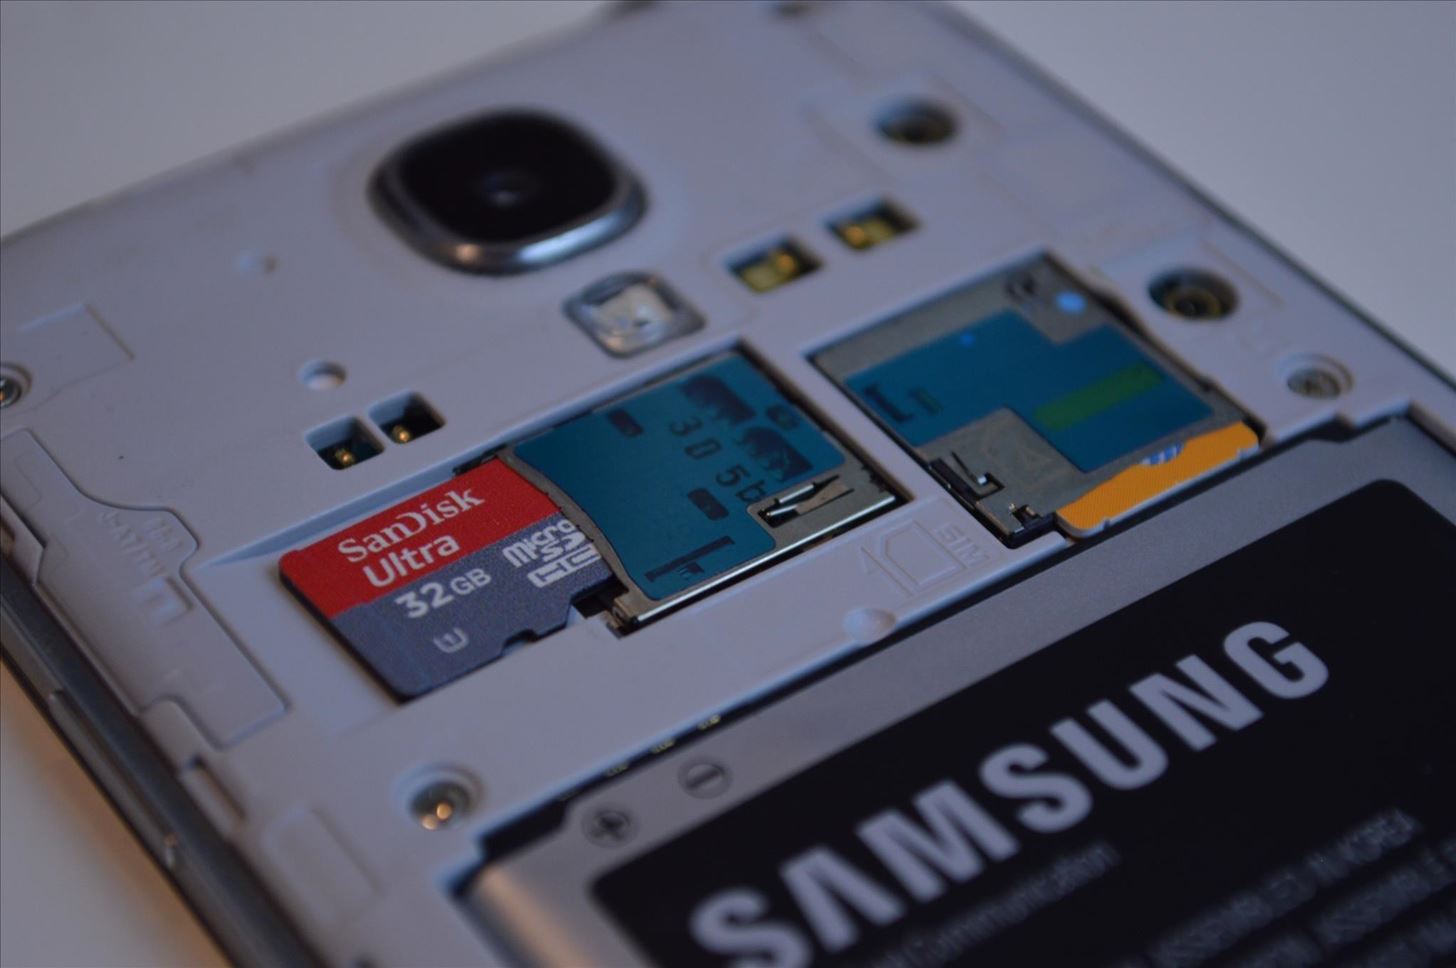 How to Bypass the SD Card Restrictions in Android 4.4 KitKat on Your Galaxy S4